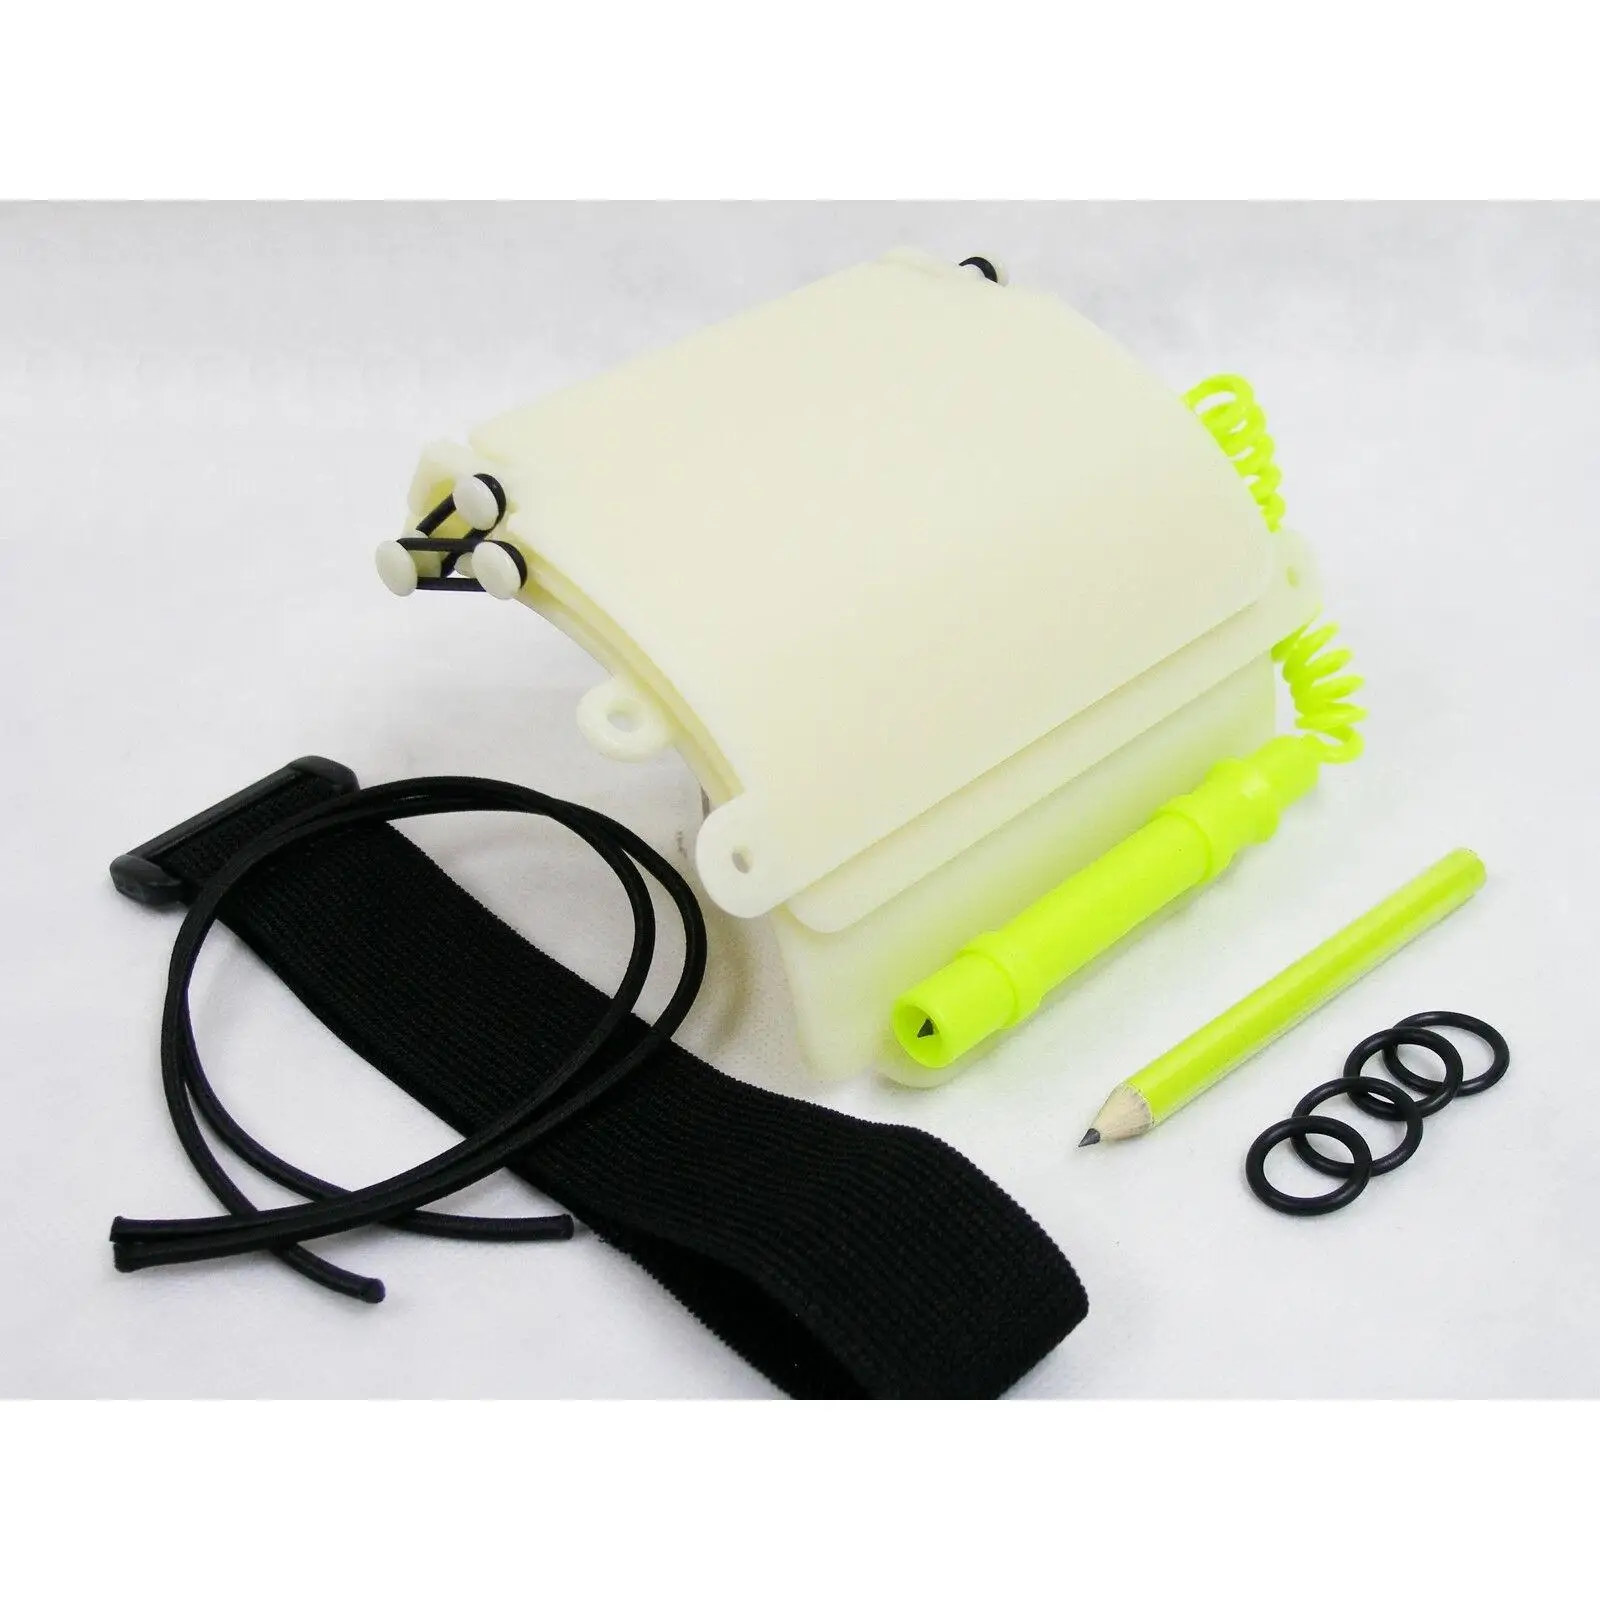 Diving Notebook Scuba Diving Logbook Underwater Convenient Diving Notebook Journal Arms Backpack